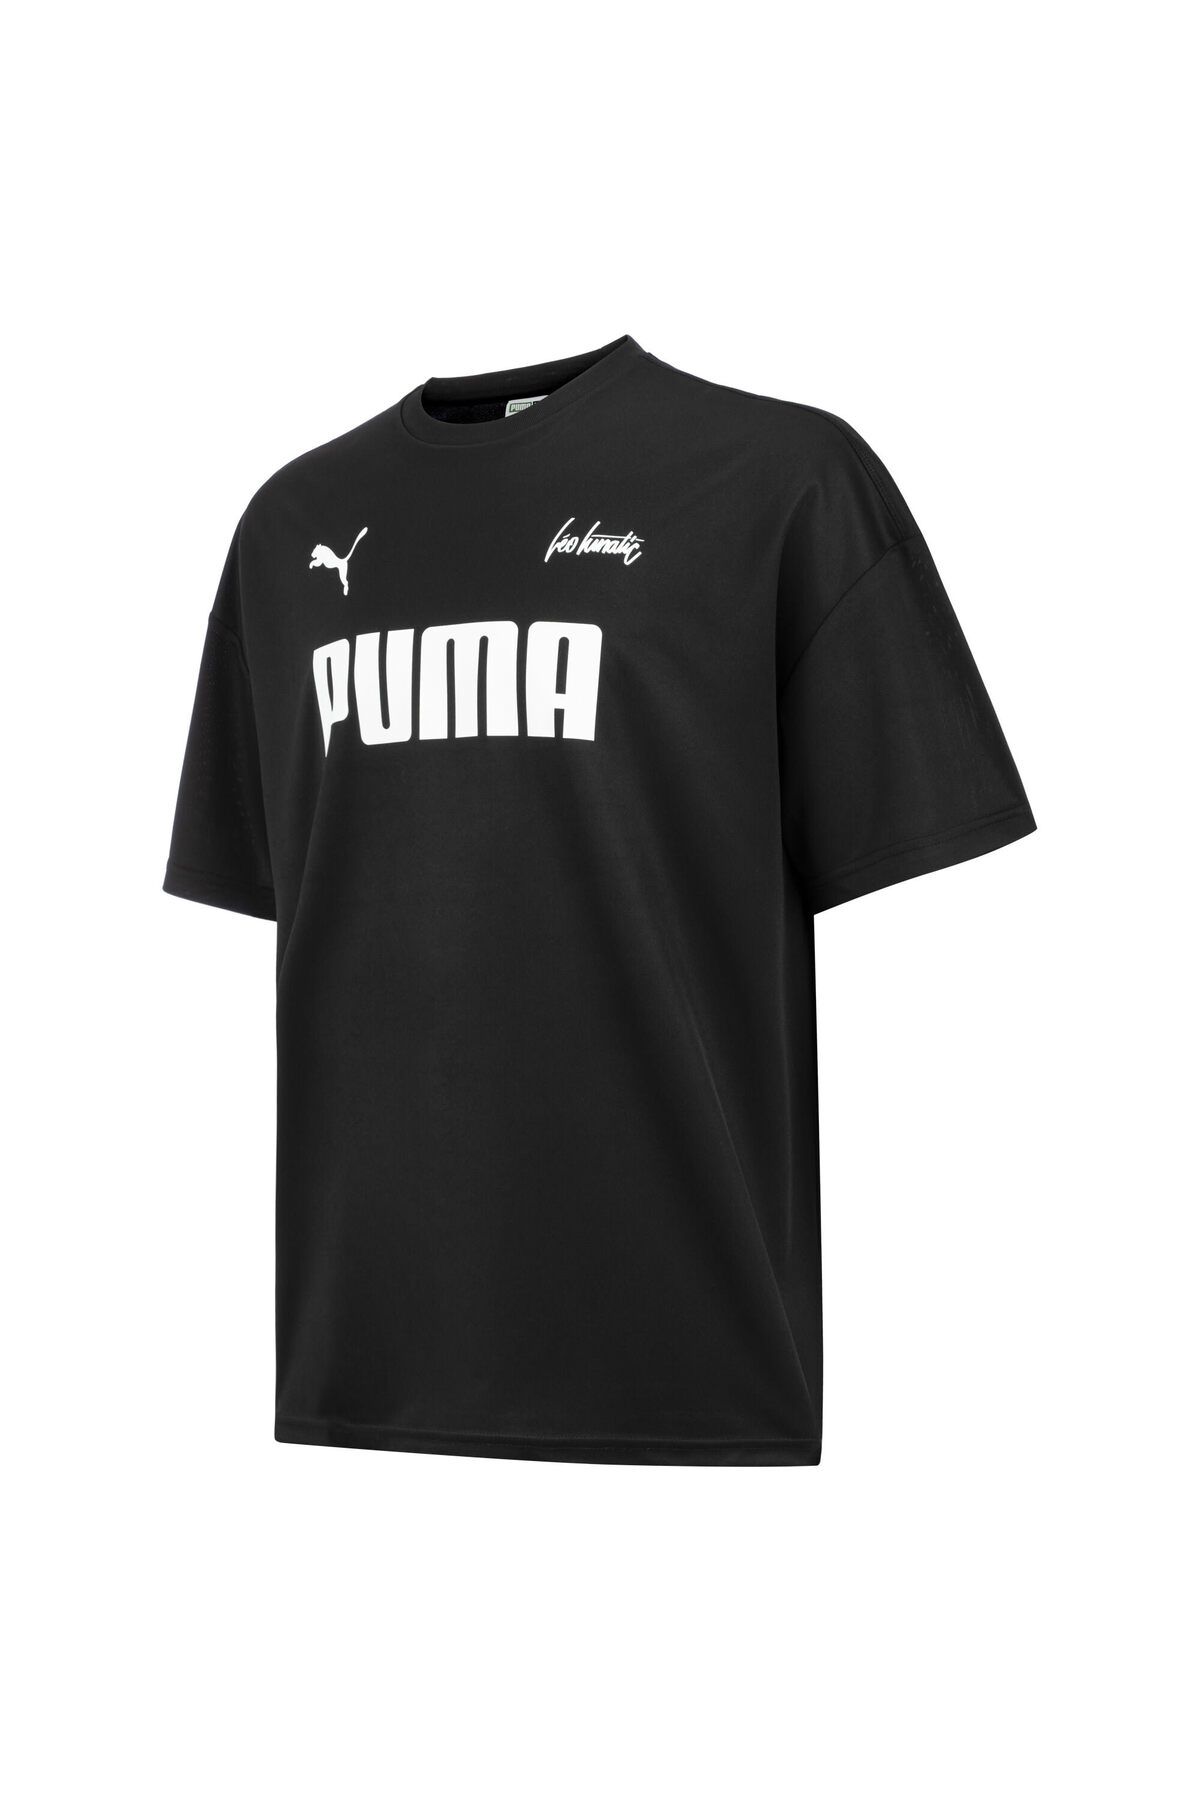 Puma İSTANBUL COLLECTION OTTOMAN OVERSIZE Forma